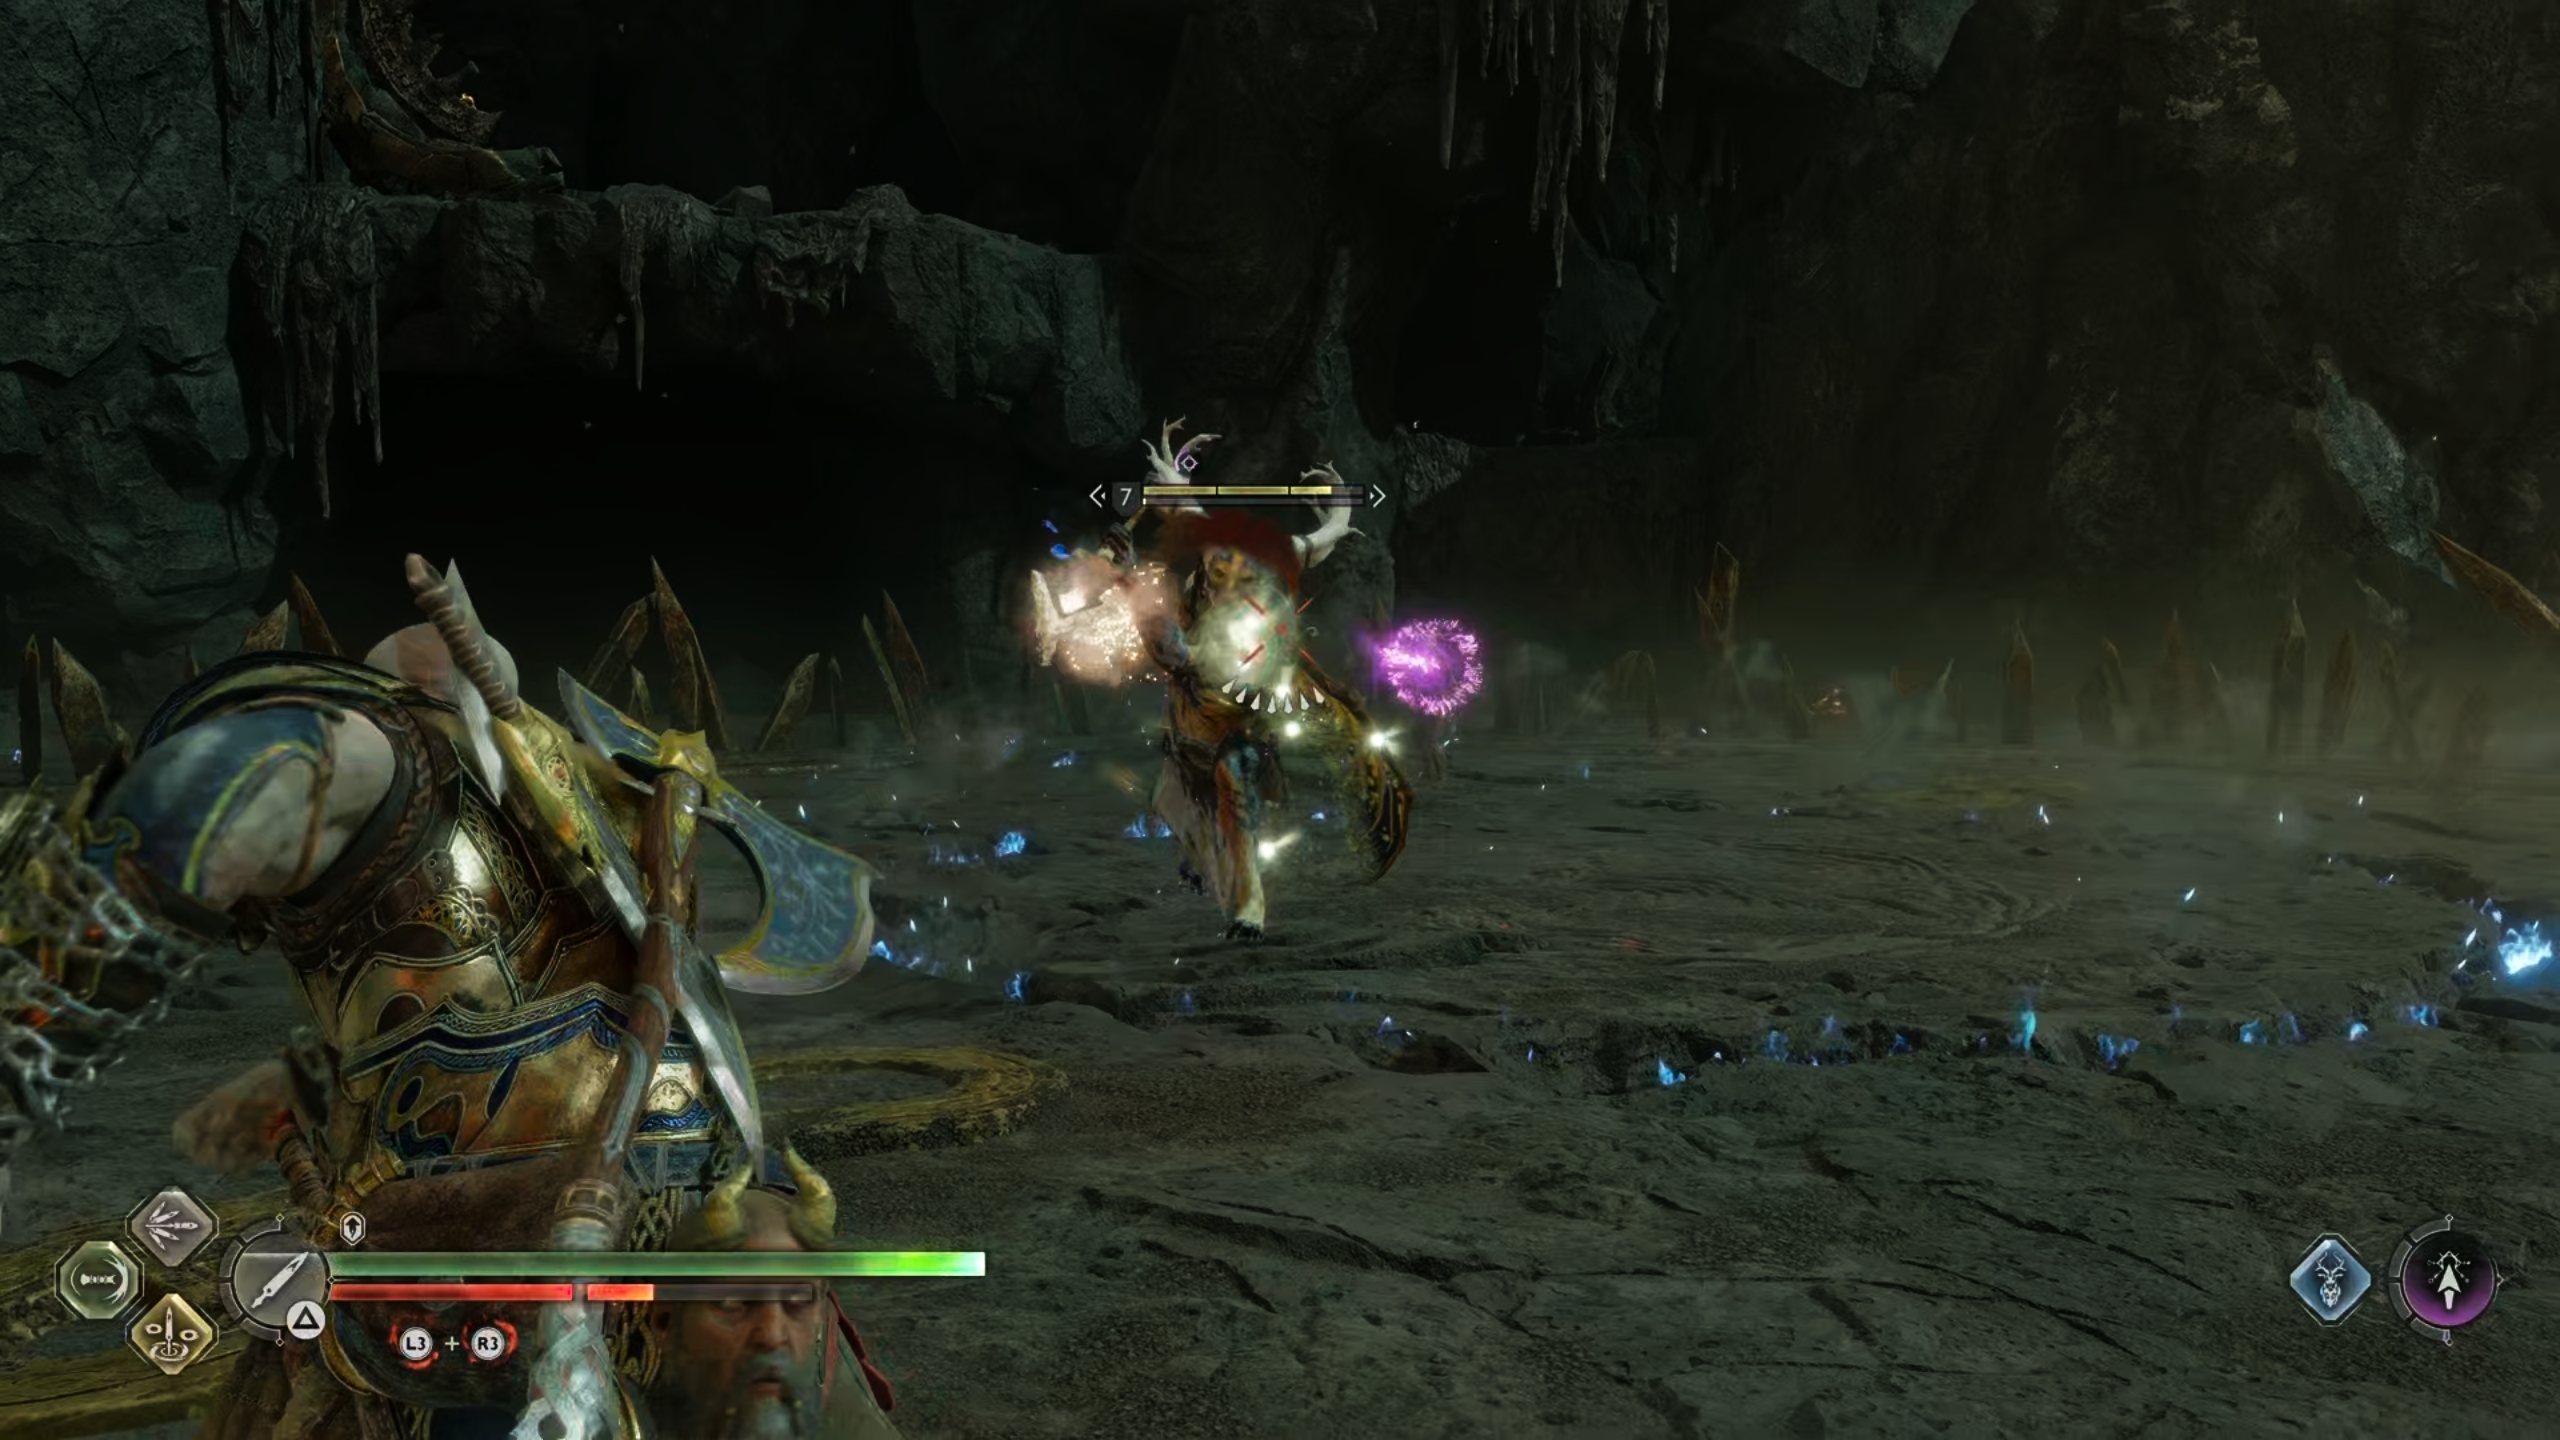 The boss will raise its halberd above the shoulder during a charge.